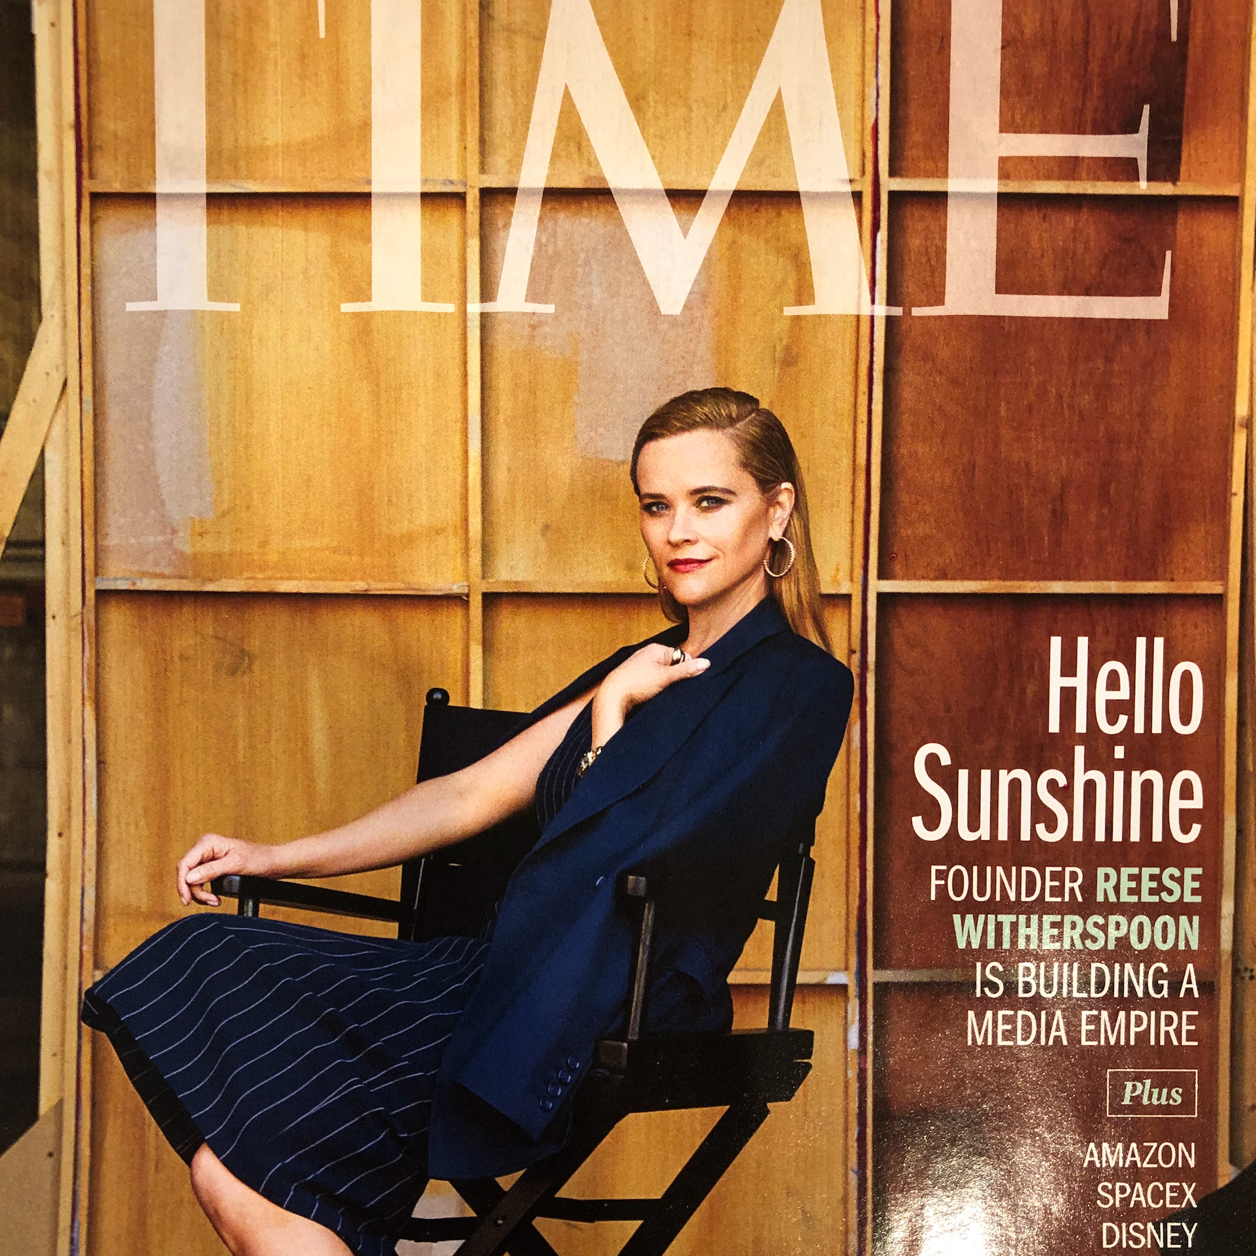 Reese Witherspoon on the cover of TIME magazine, featuring the 100 most influential companies